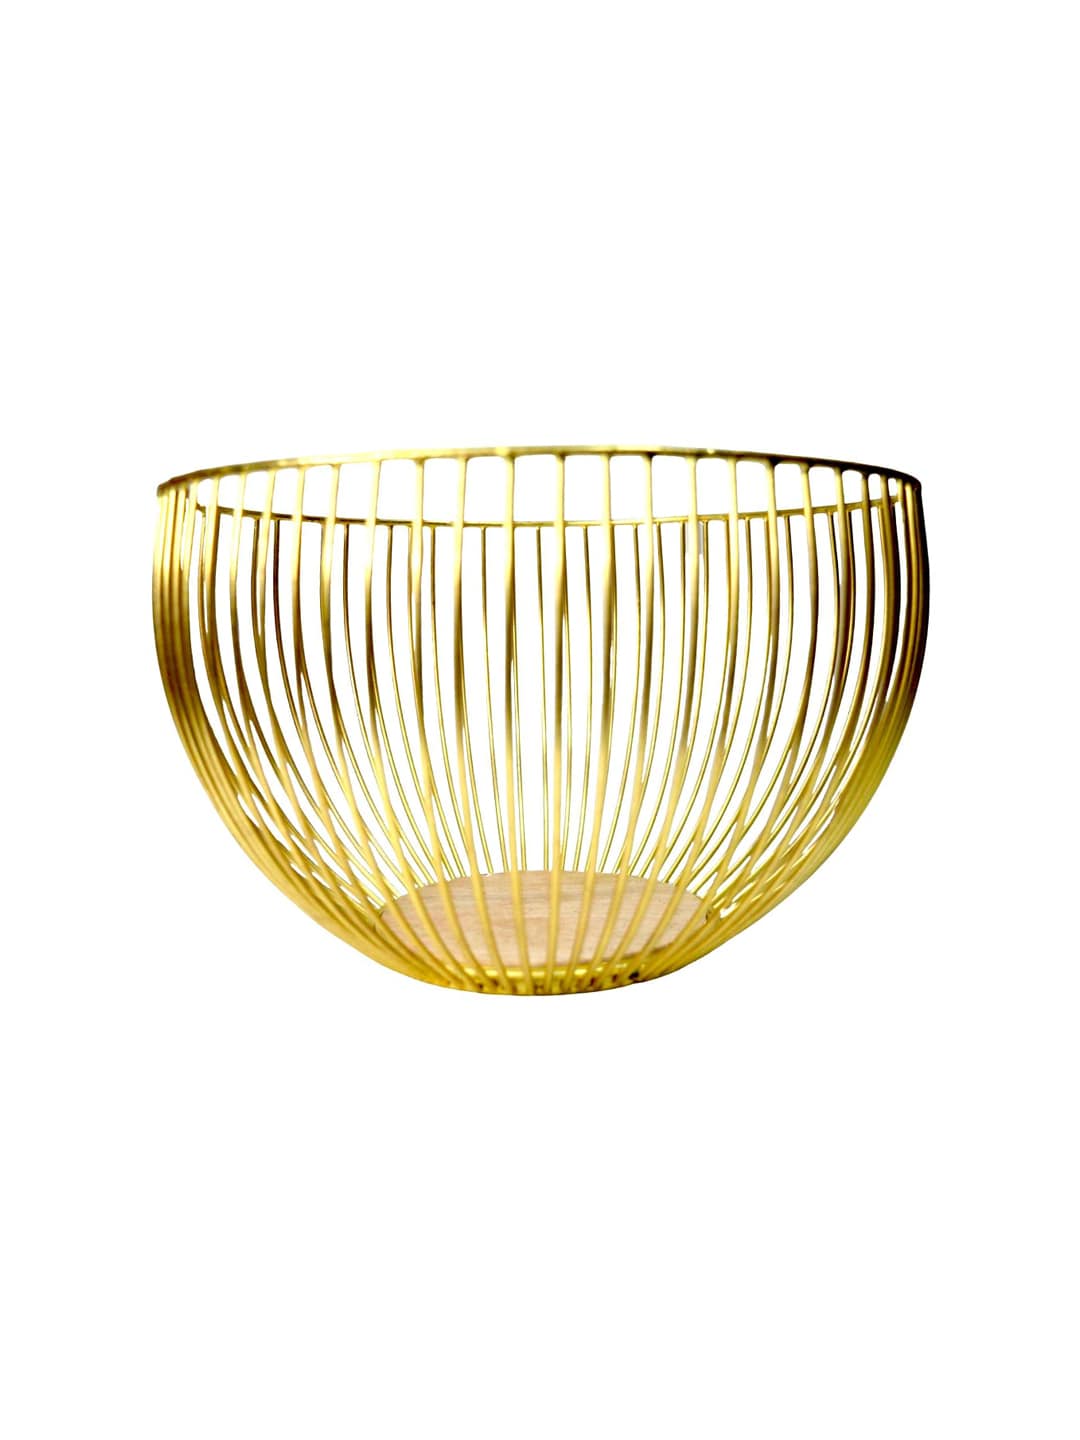 Tranquil square Gold Toned & Beige Wooden Fruit & Vegetable Basket Price in India